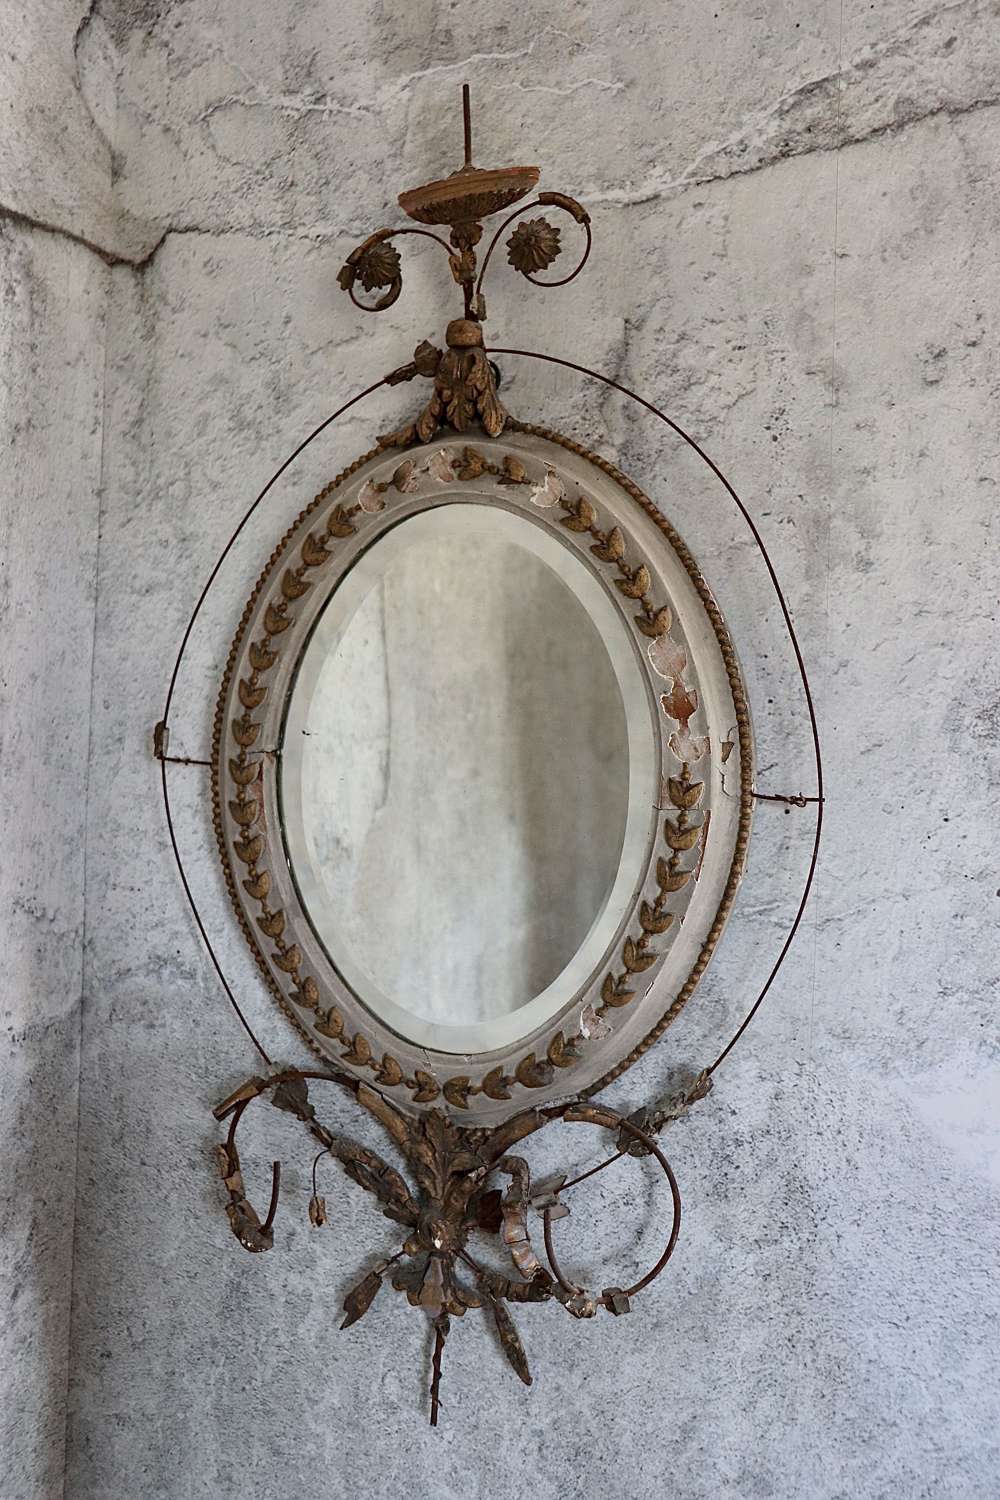 Bevelled giro dole mirror with painted and gilt frame